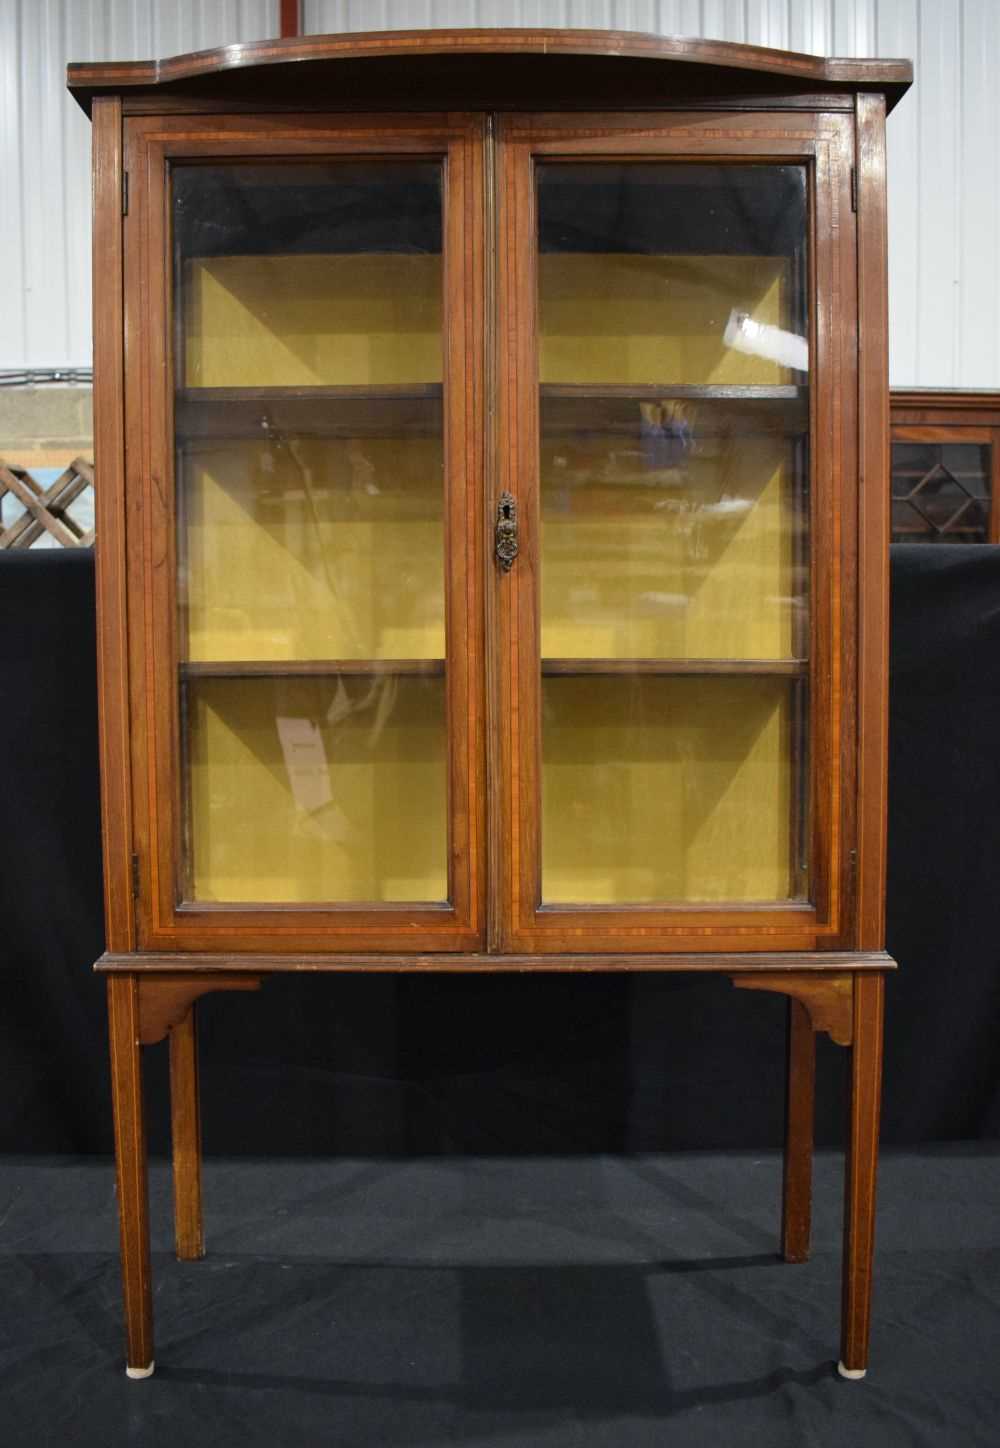 An Edwardian glass fronted inlaid display cabinet 120 x 76 x 34 cm - Image 2 of 10